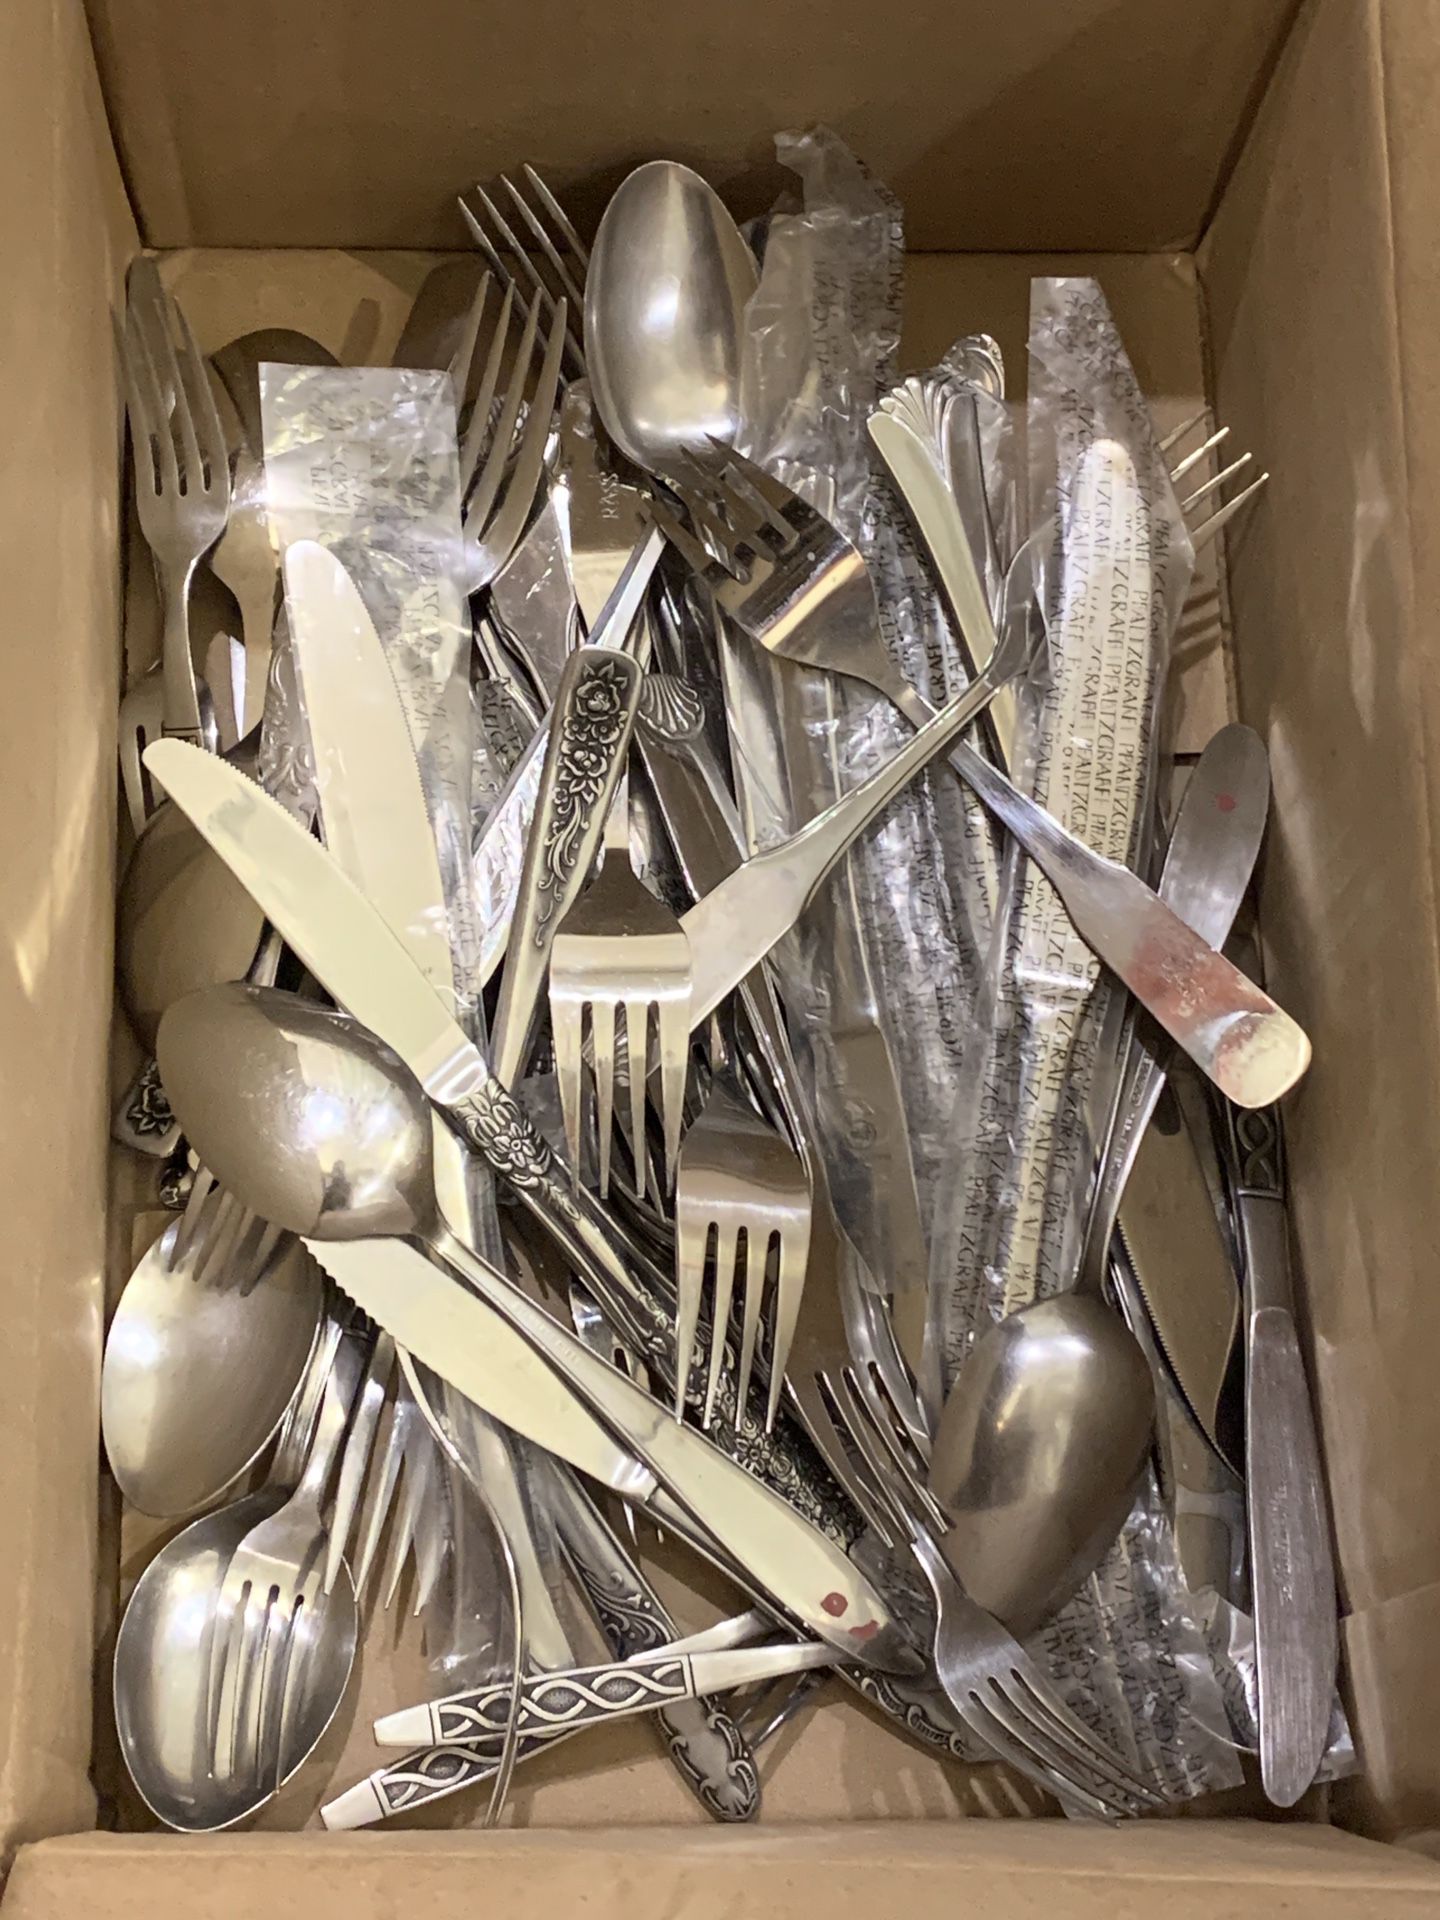 Spoons, forks and knives